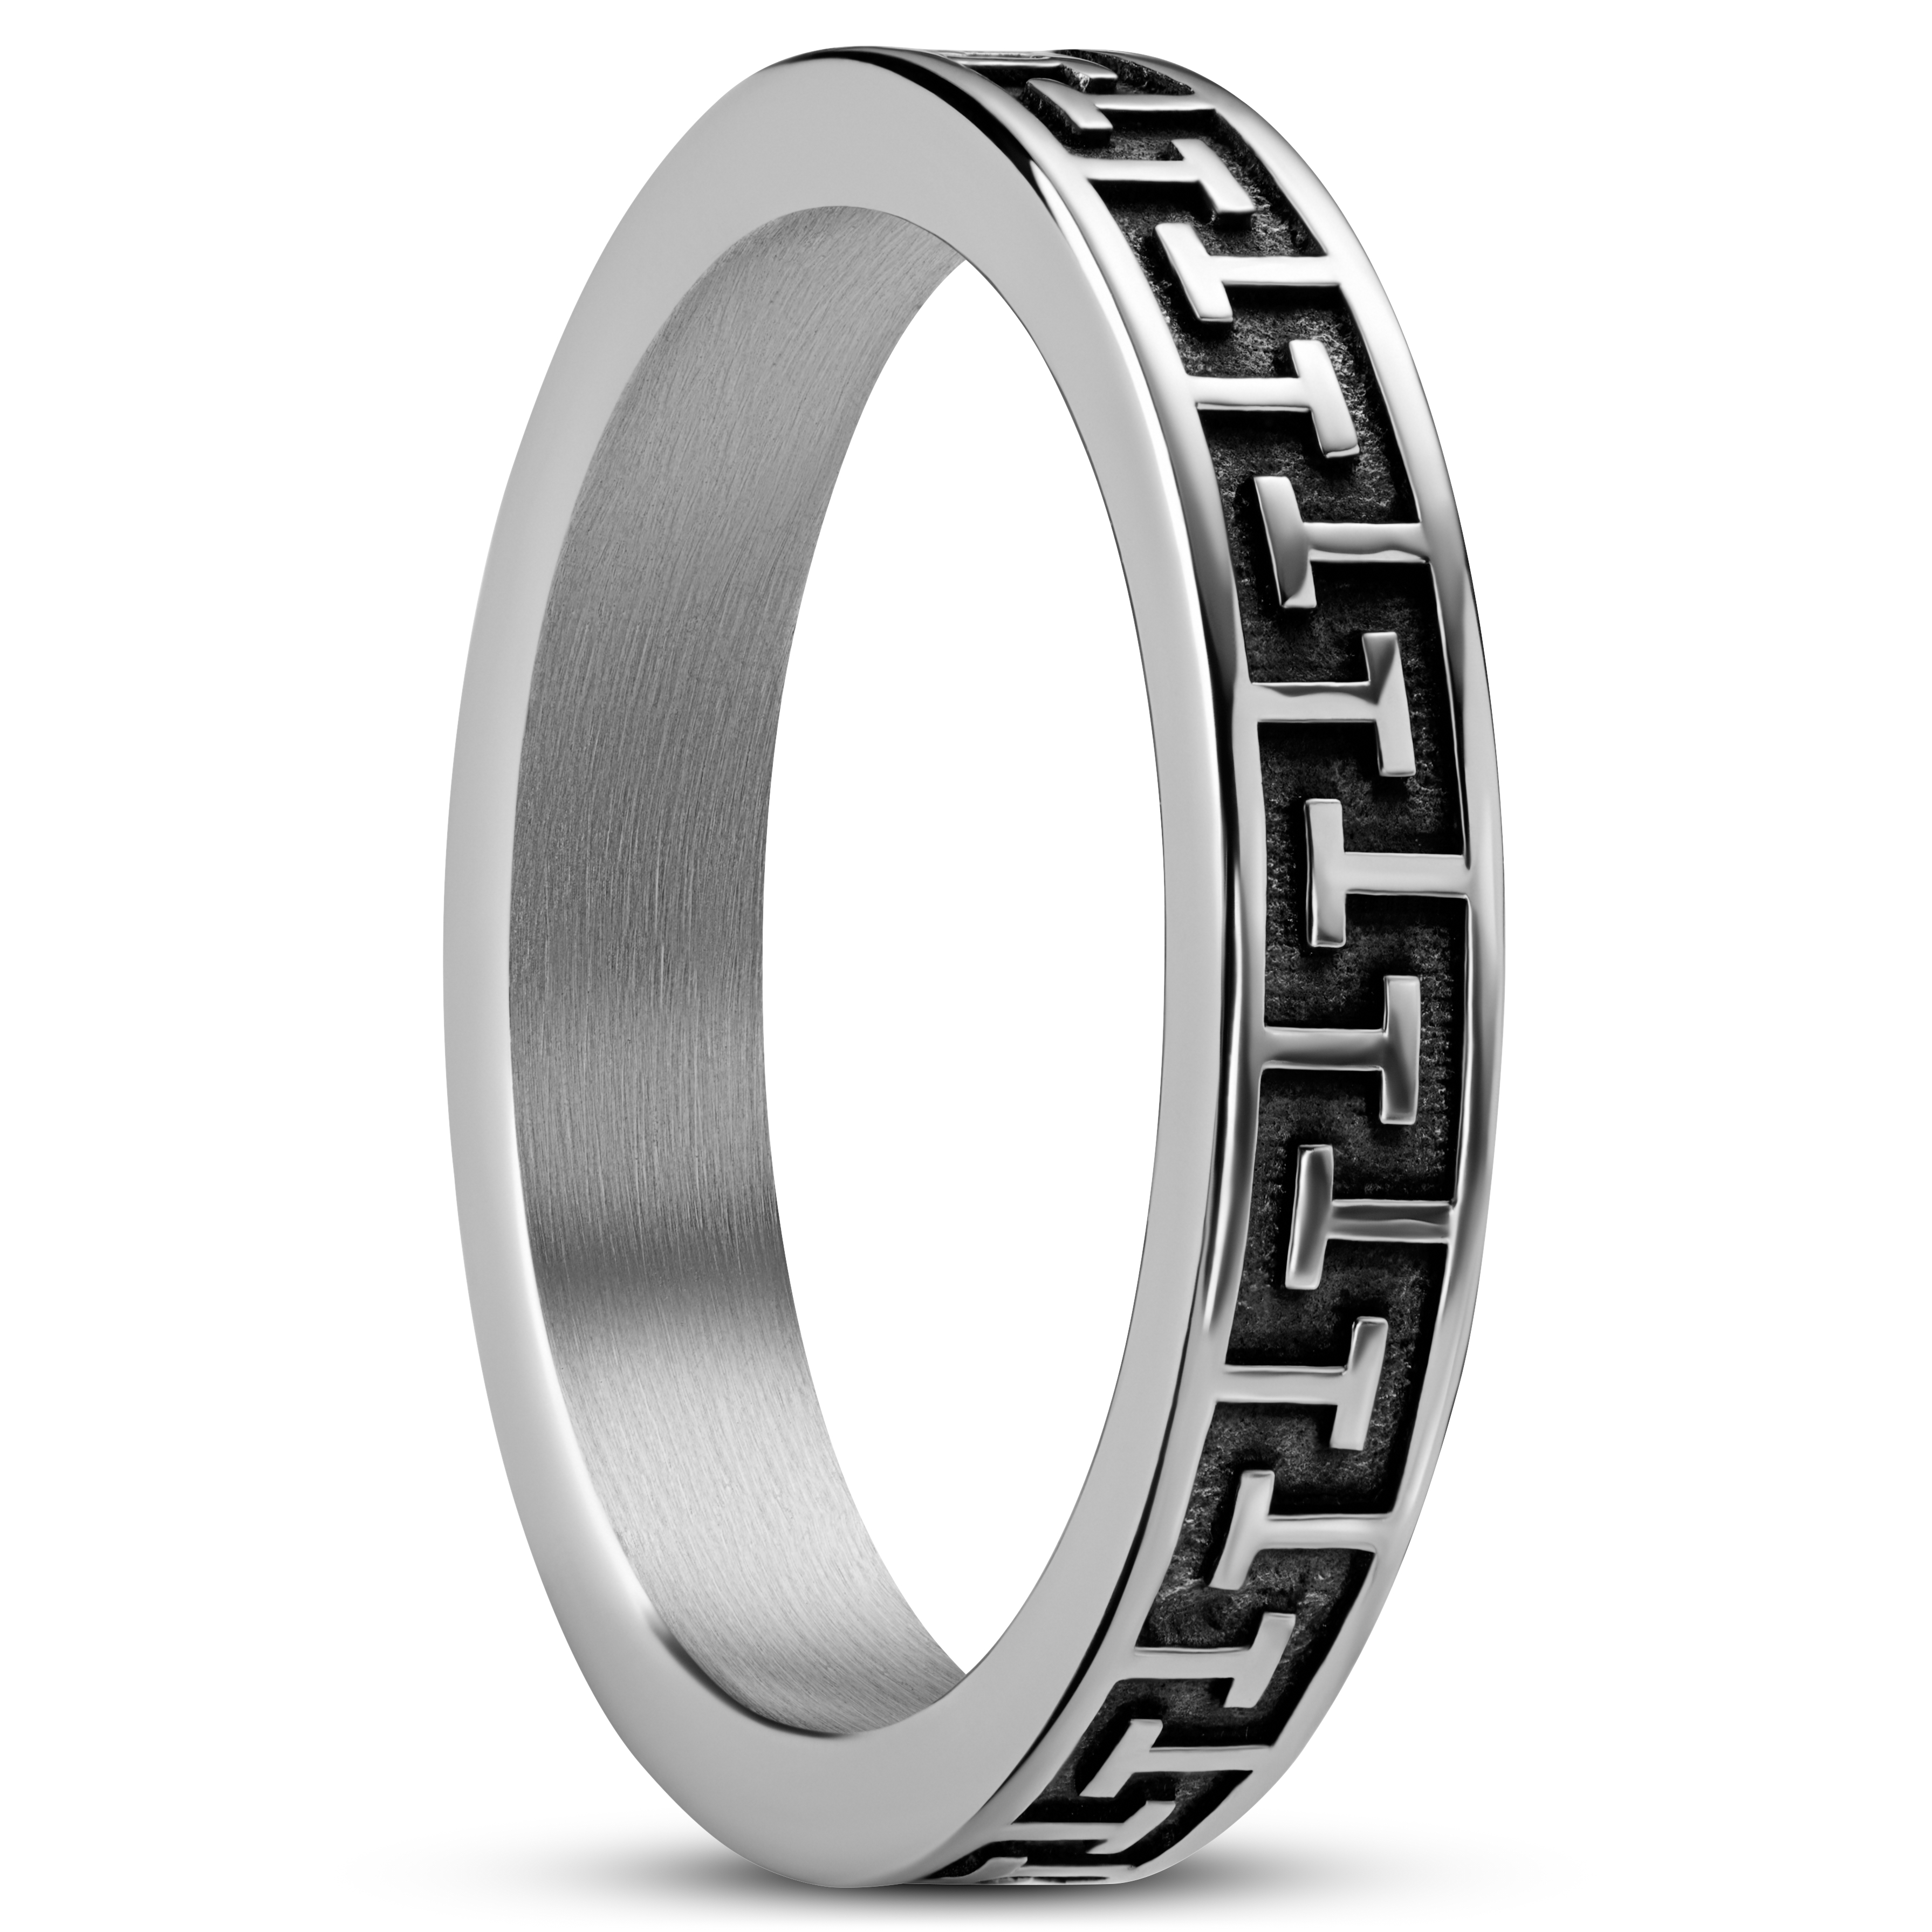 8mm Stainless Steel Domed Wedding Ring